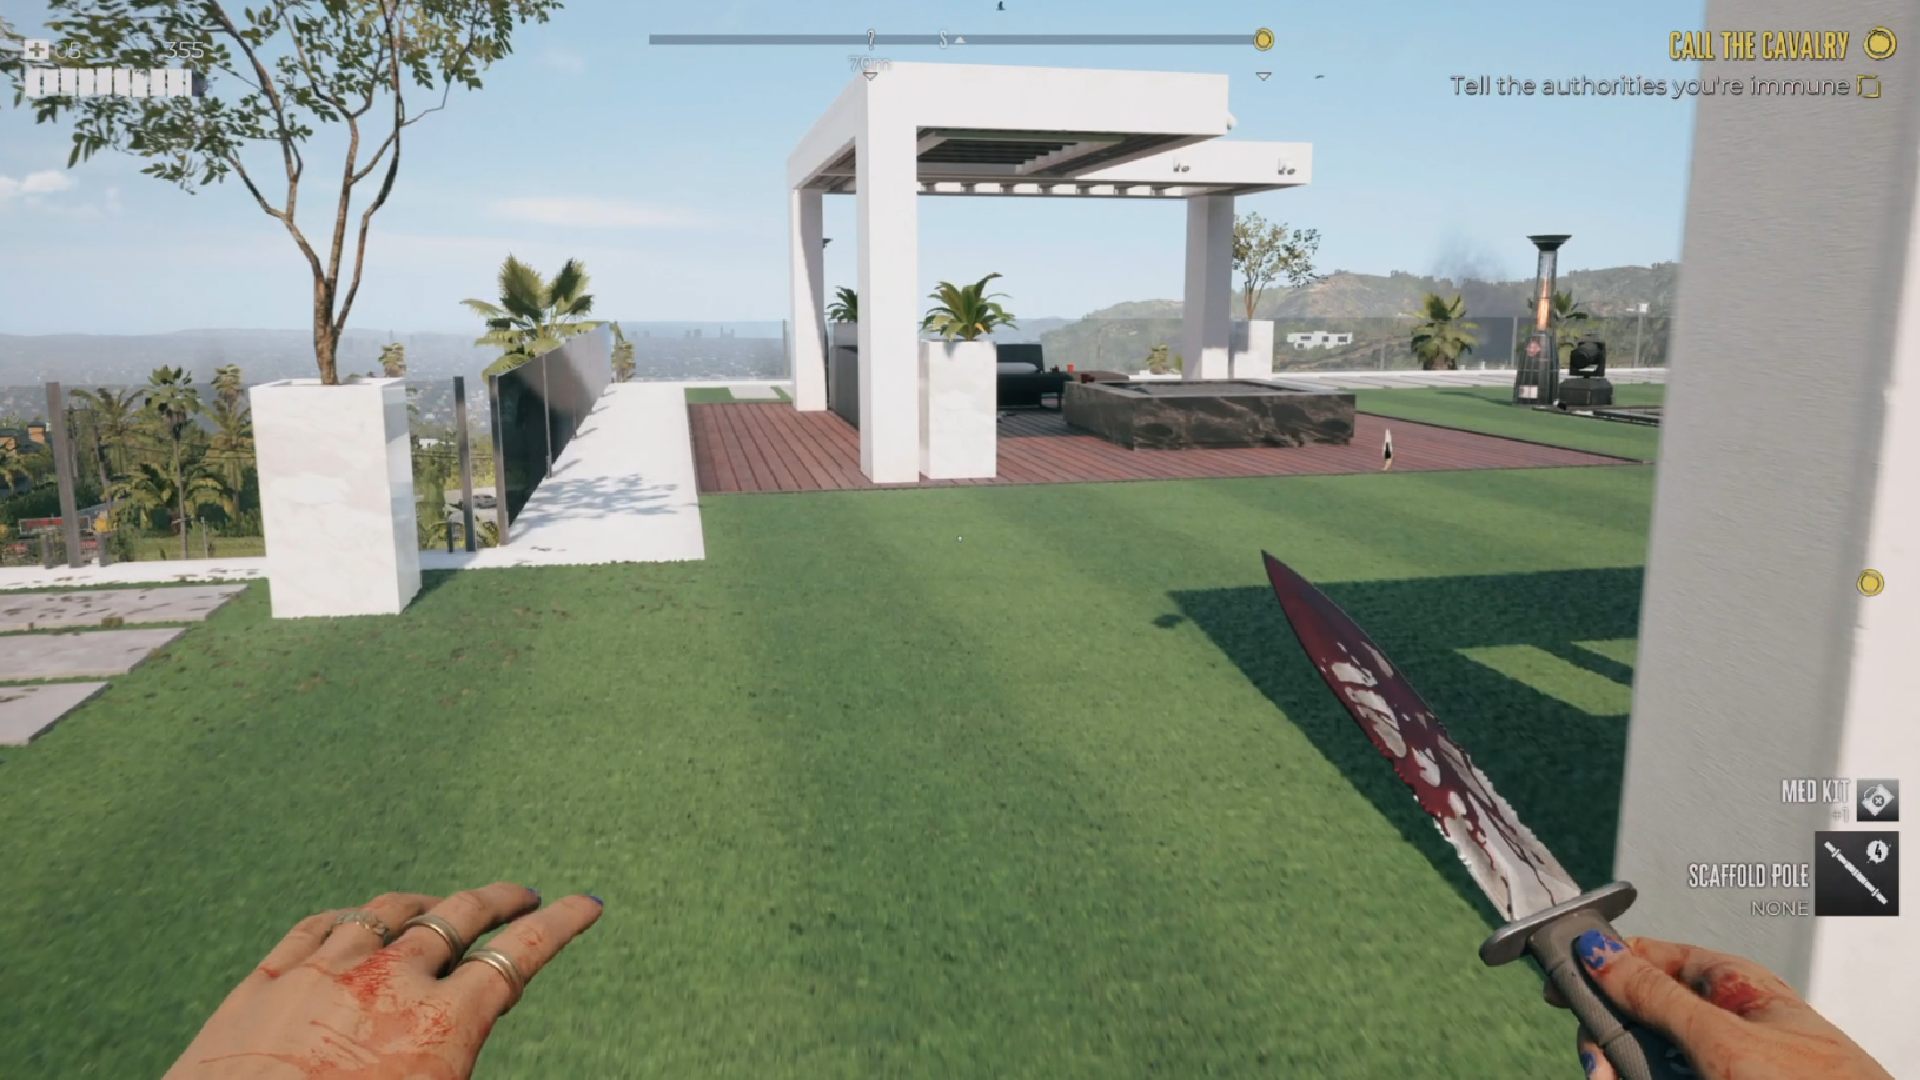 Dead Island 2 Goat Pen Master Keys: the player can be seen